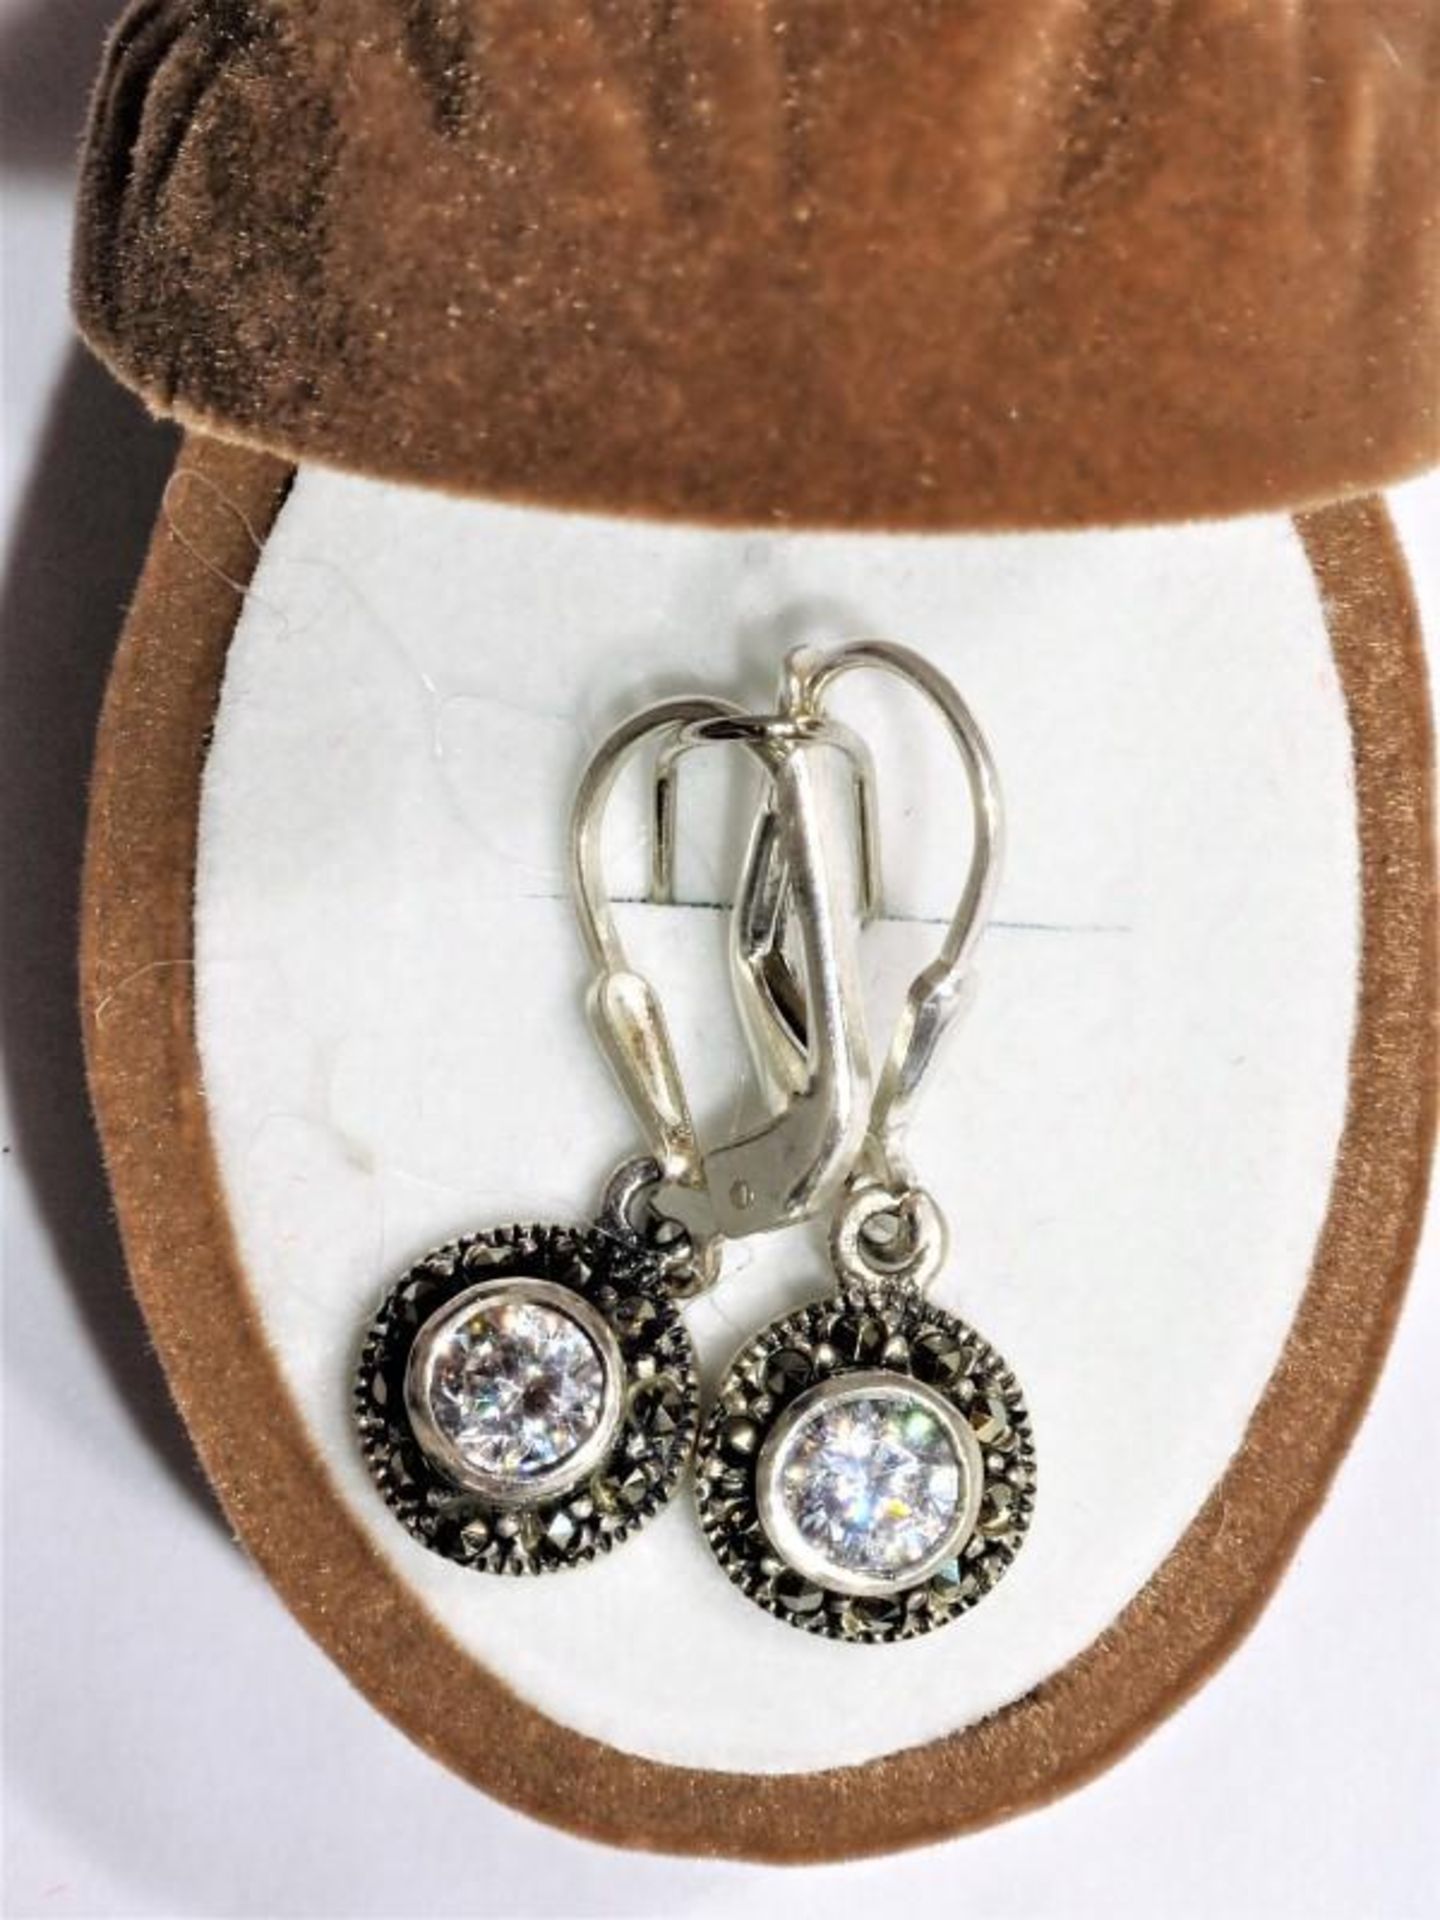 Cubic Zirconia Marcasite Lever Back Earrings, Retail $150 (MS19 - 22) - Image 2 of 2